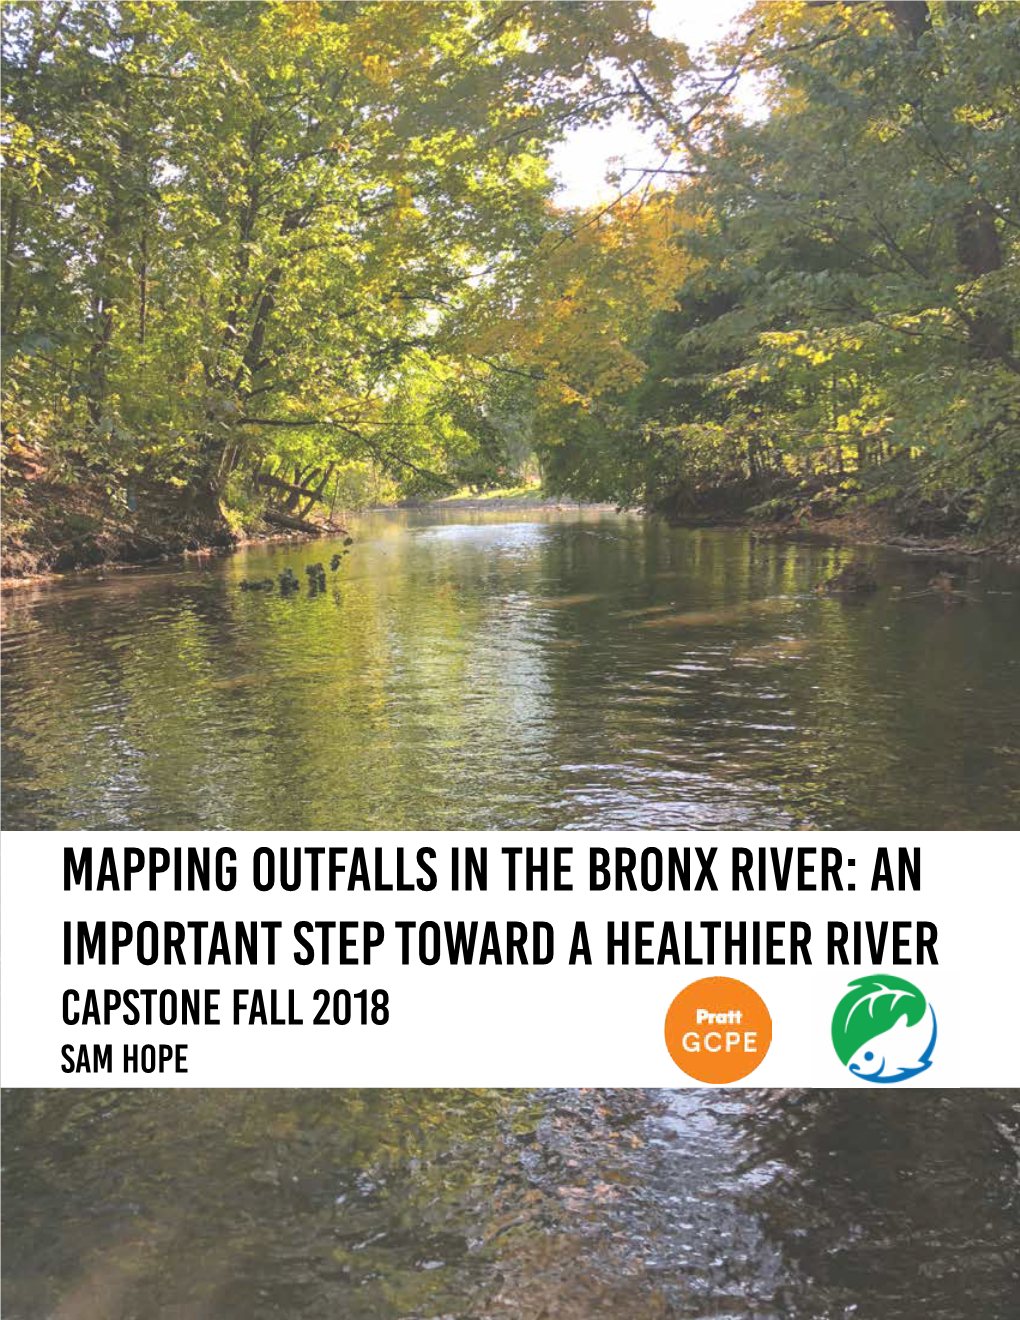 MAPPING OUTFALLS in the BRONX RIVER: an IMPORTANT STEP TOWARD a HEALTHIER RIVER CAPSTONE FALL 2018 SAM HOPE Contents